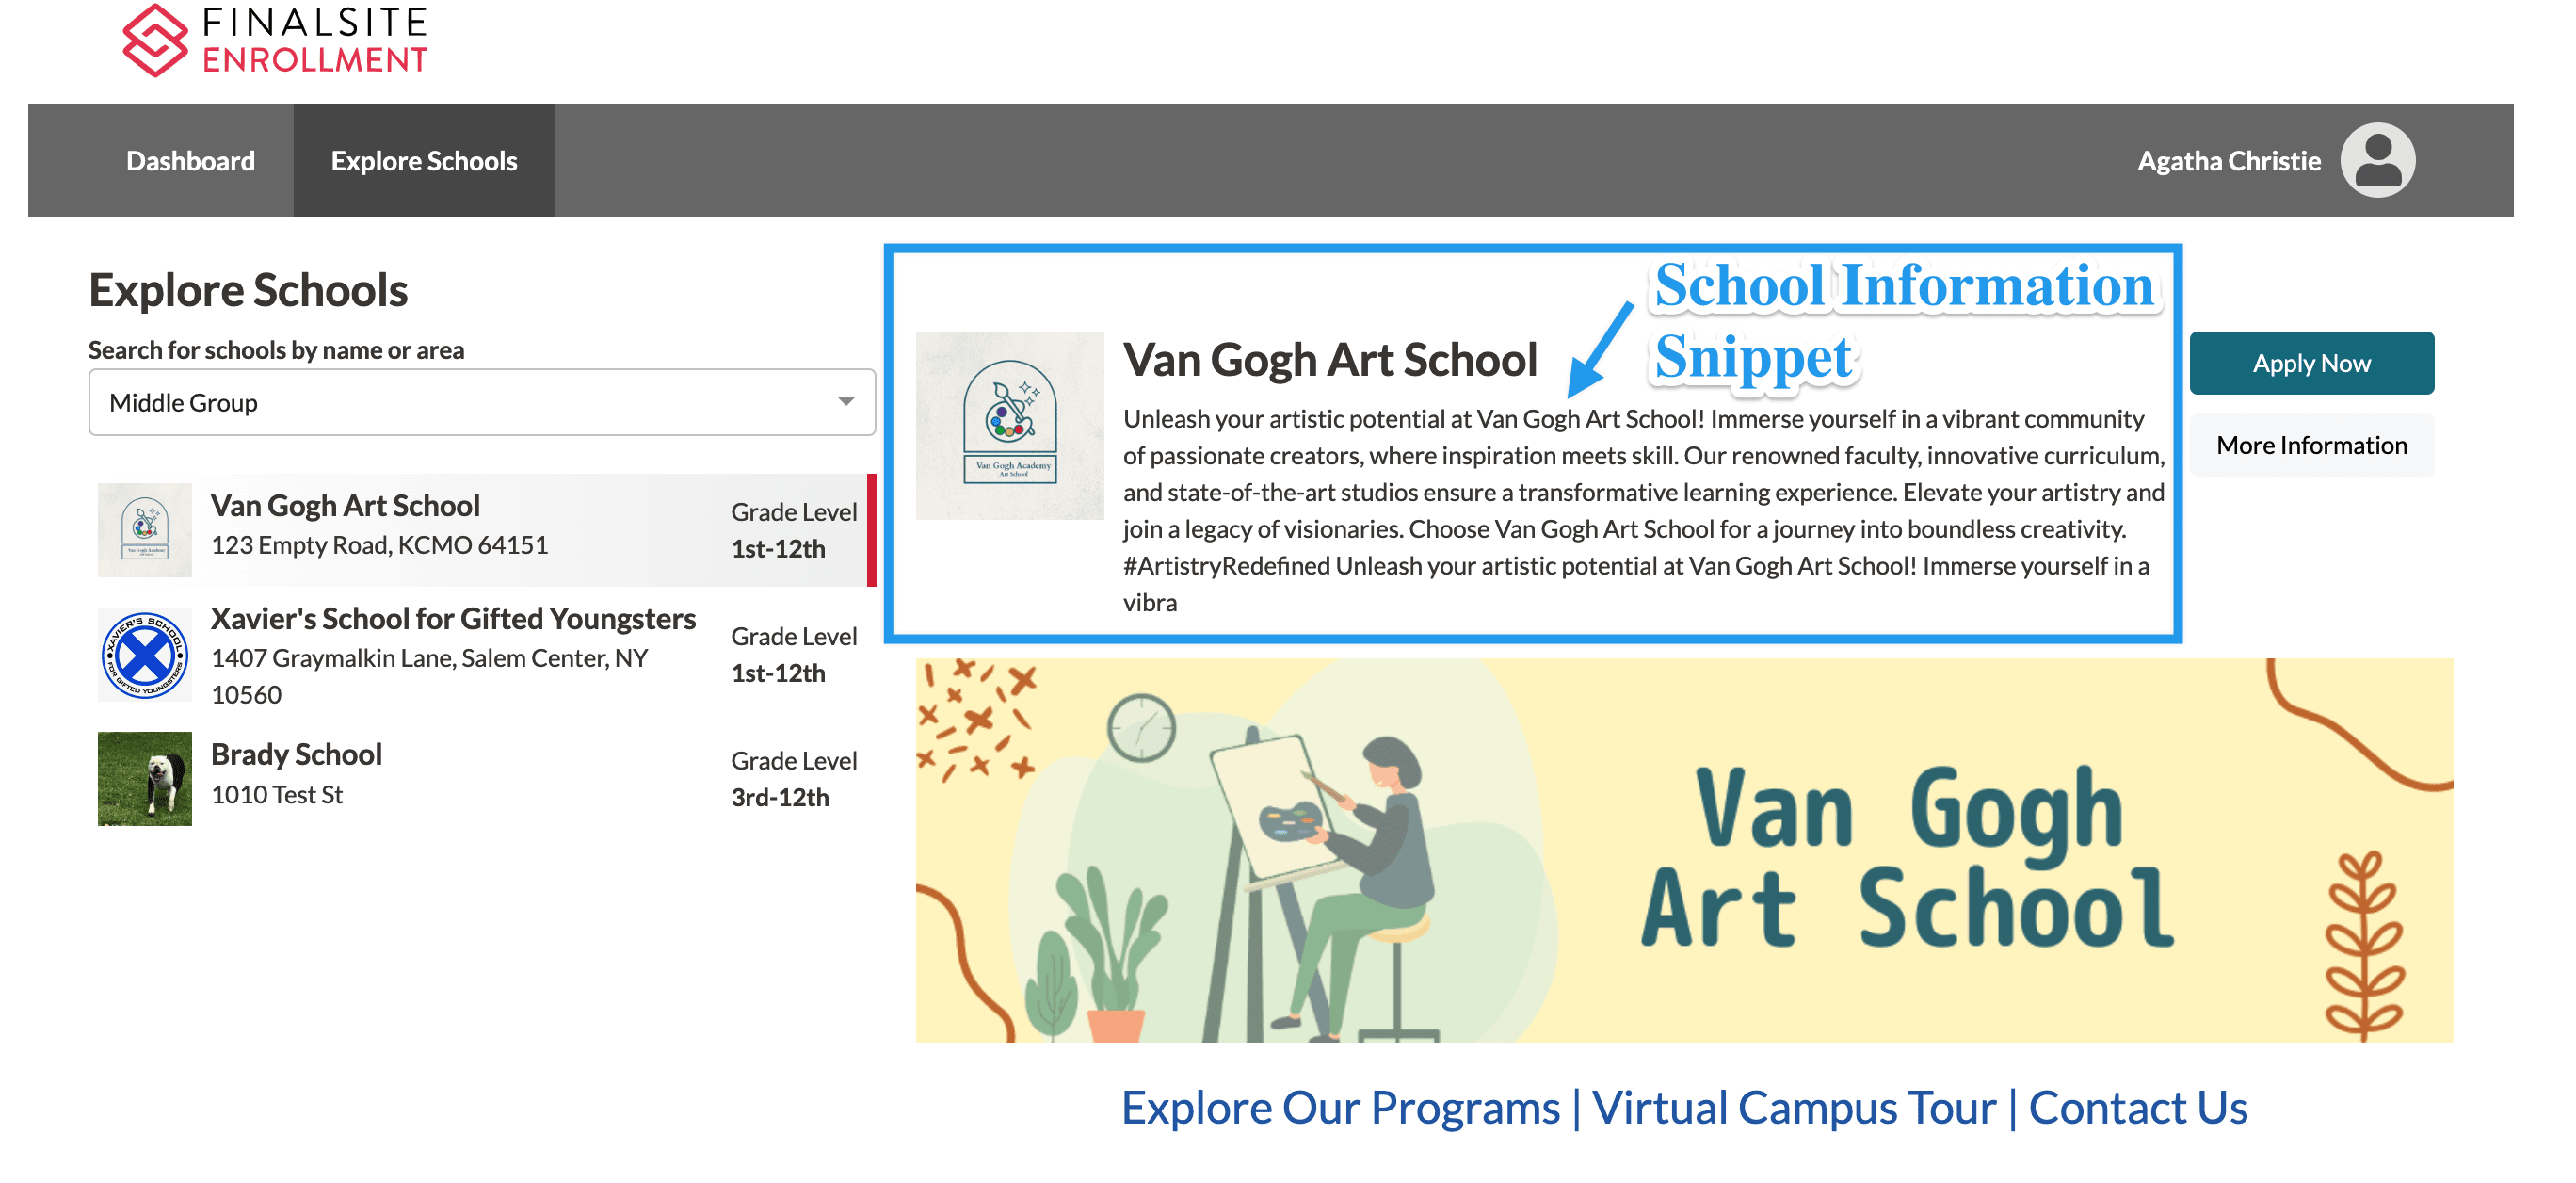 School Info Snippet in the shared portal